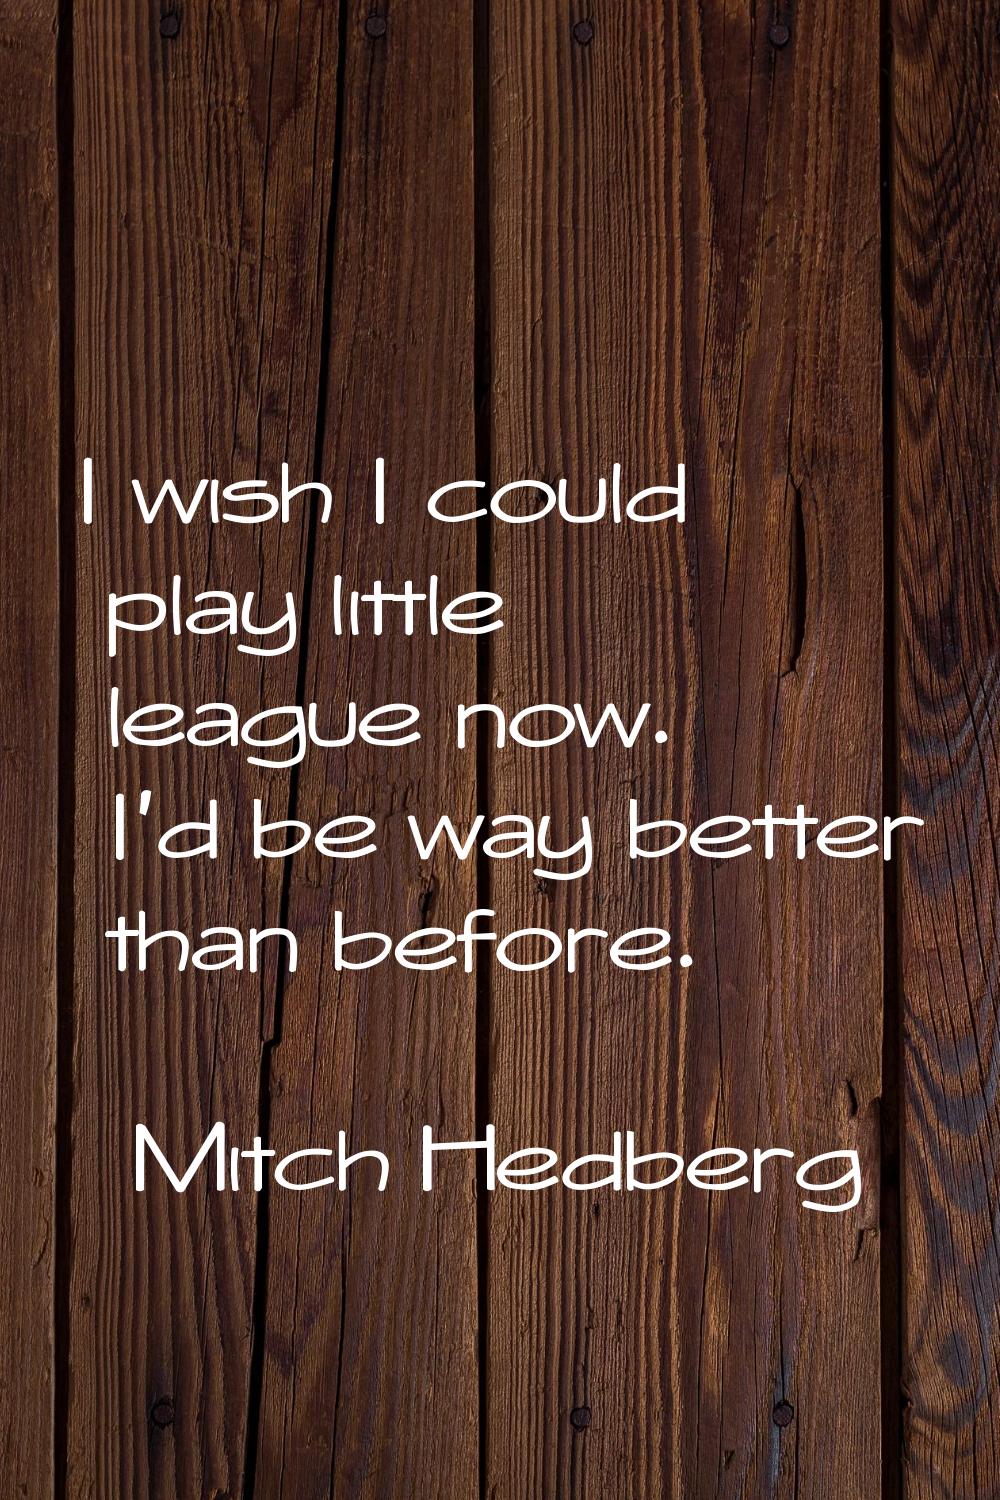 I wish I could play little league now. I'd be way better than before.